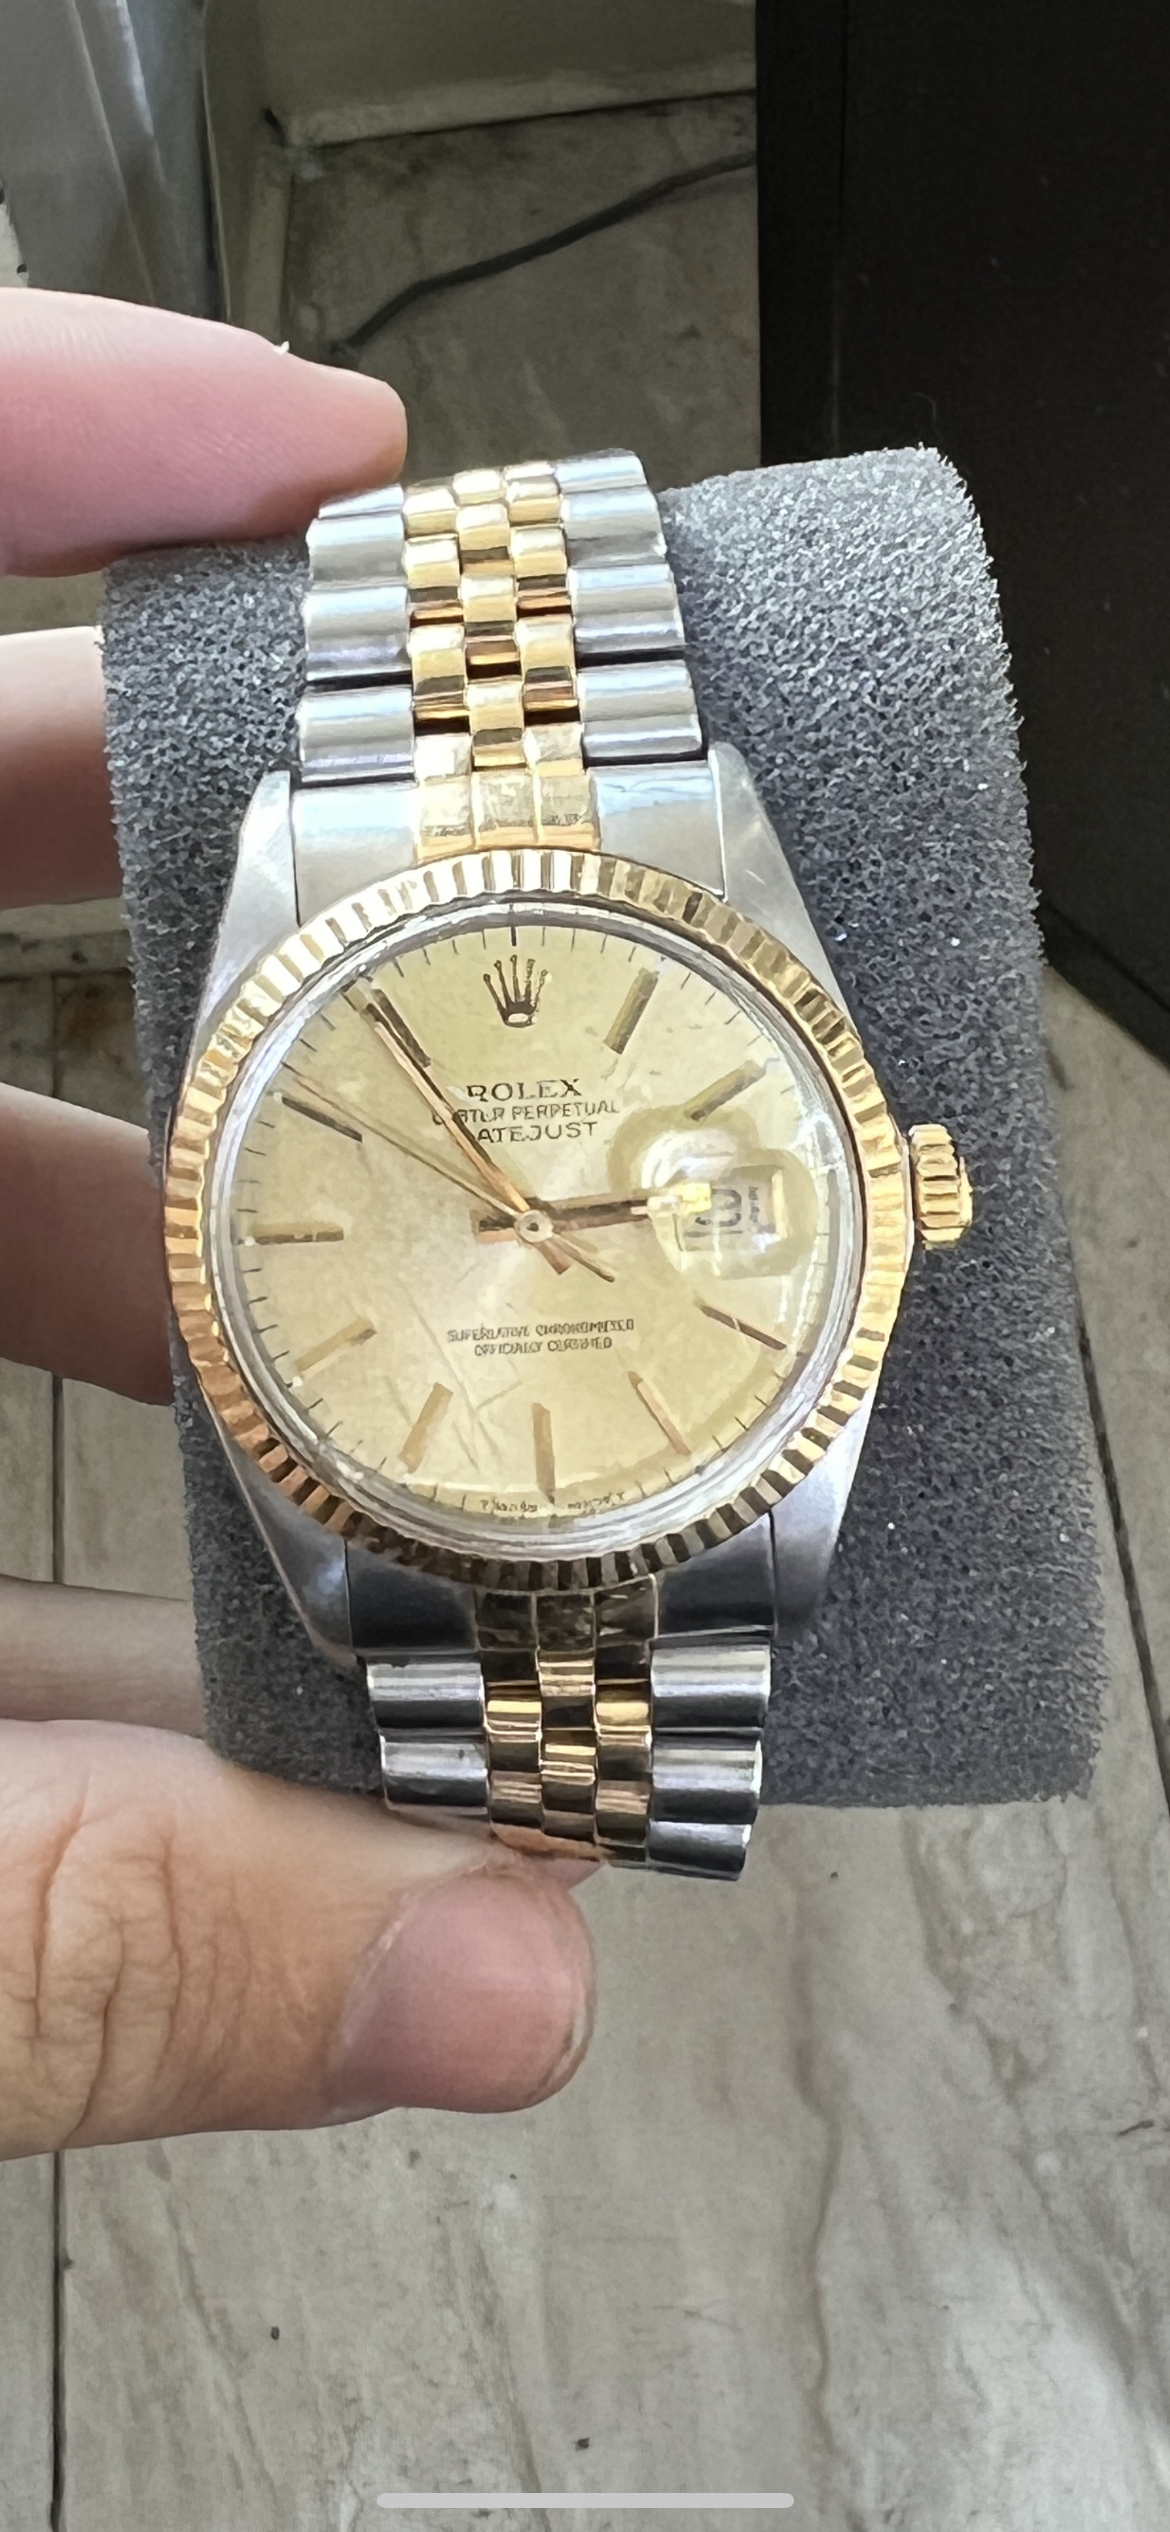 36mm Rolex Datejust Two-Tone Jubilee Band